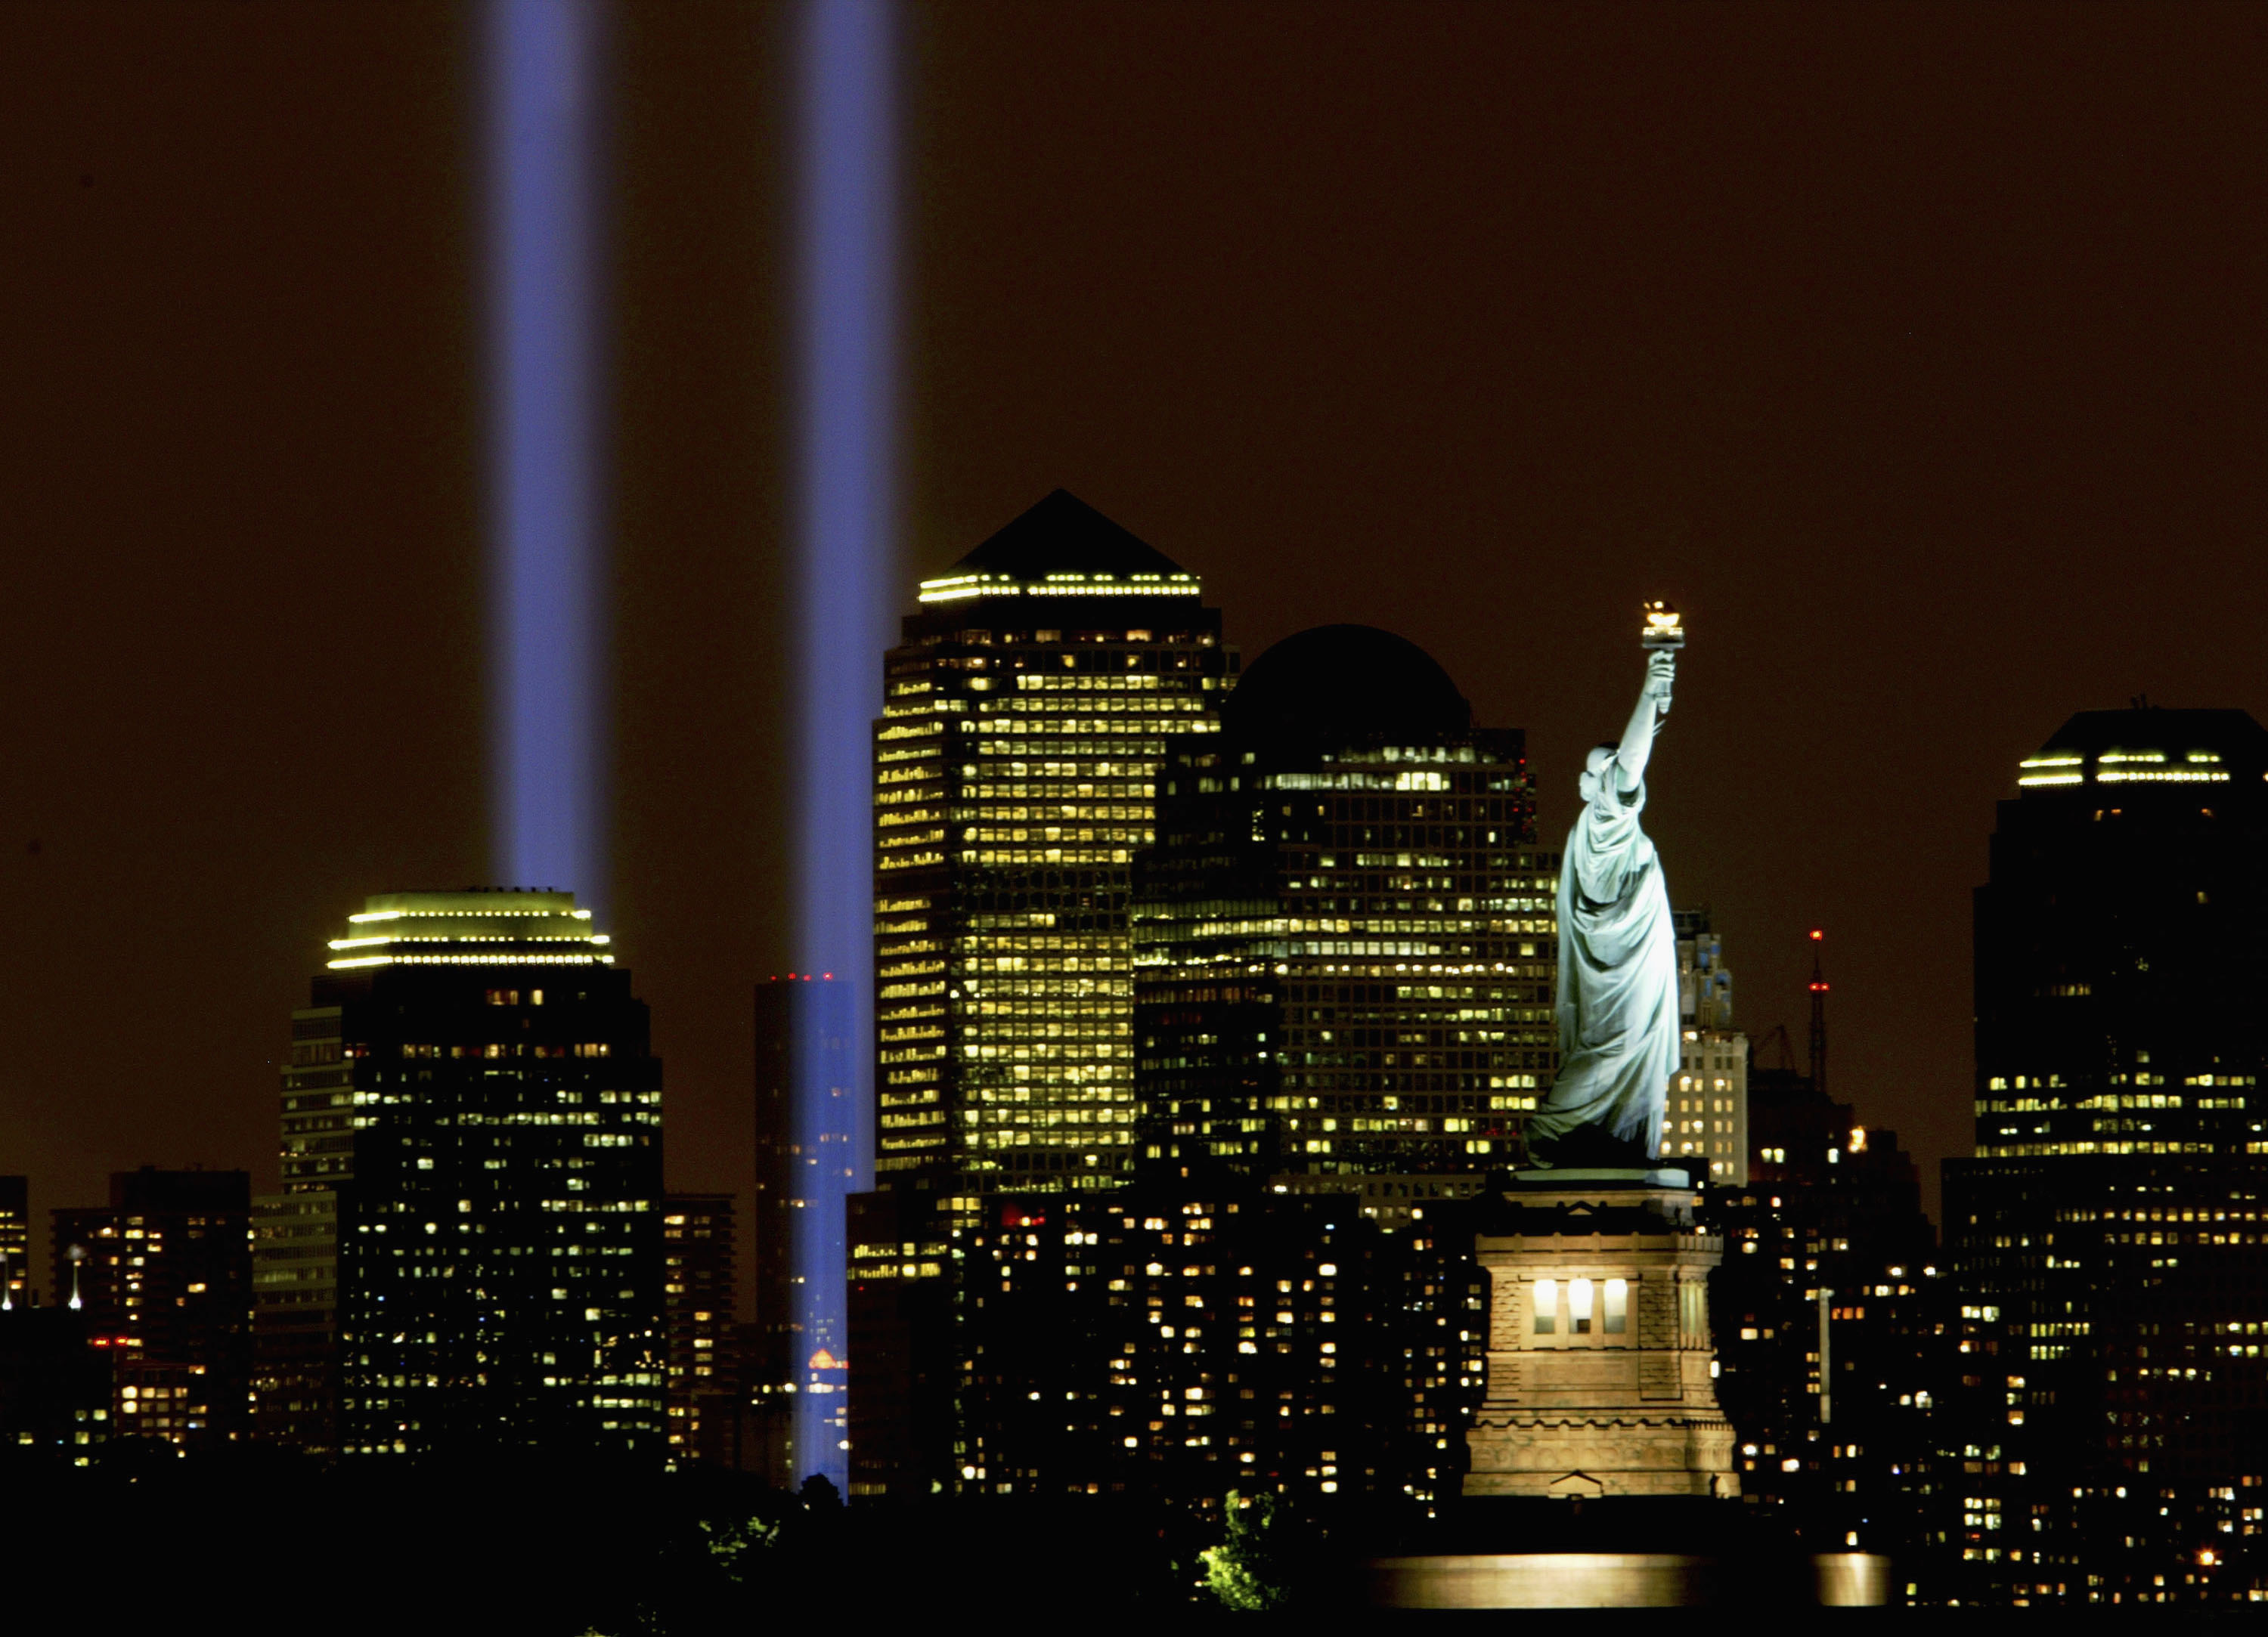 Two columns of light symbolize the fallen World Trade Center towers in a tribute in light September 11, 2003 in New York City